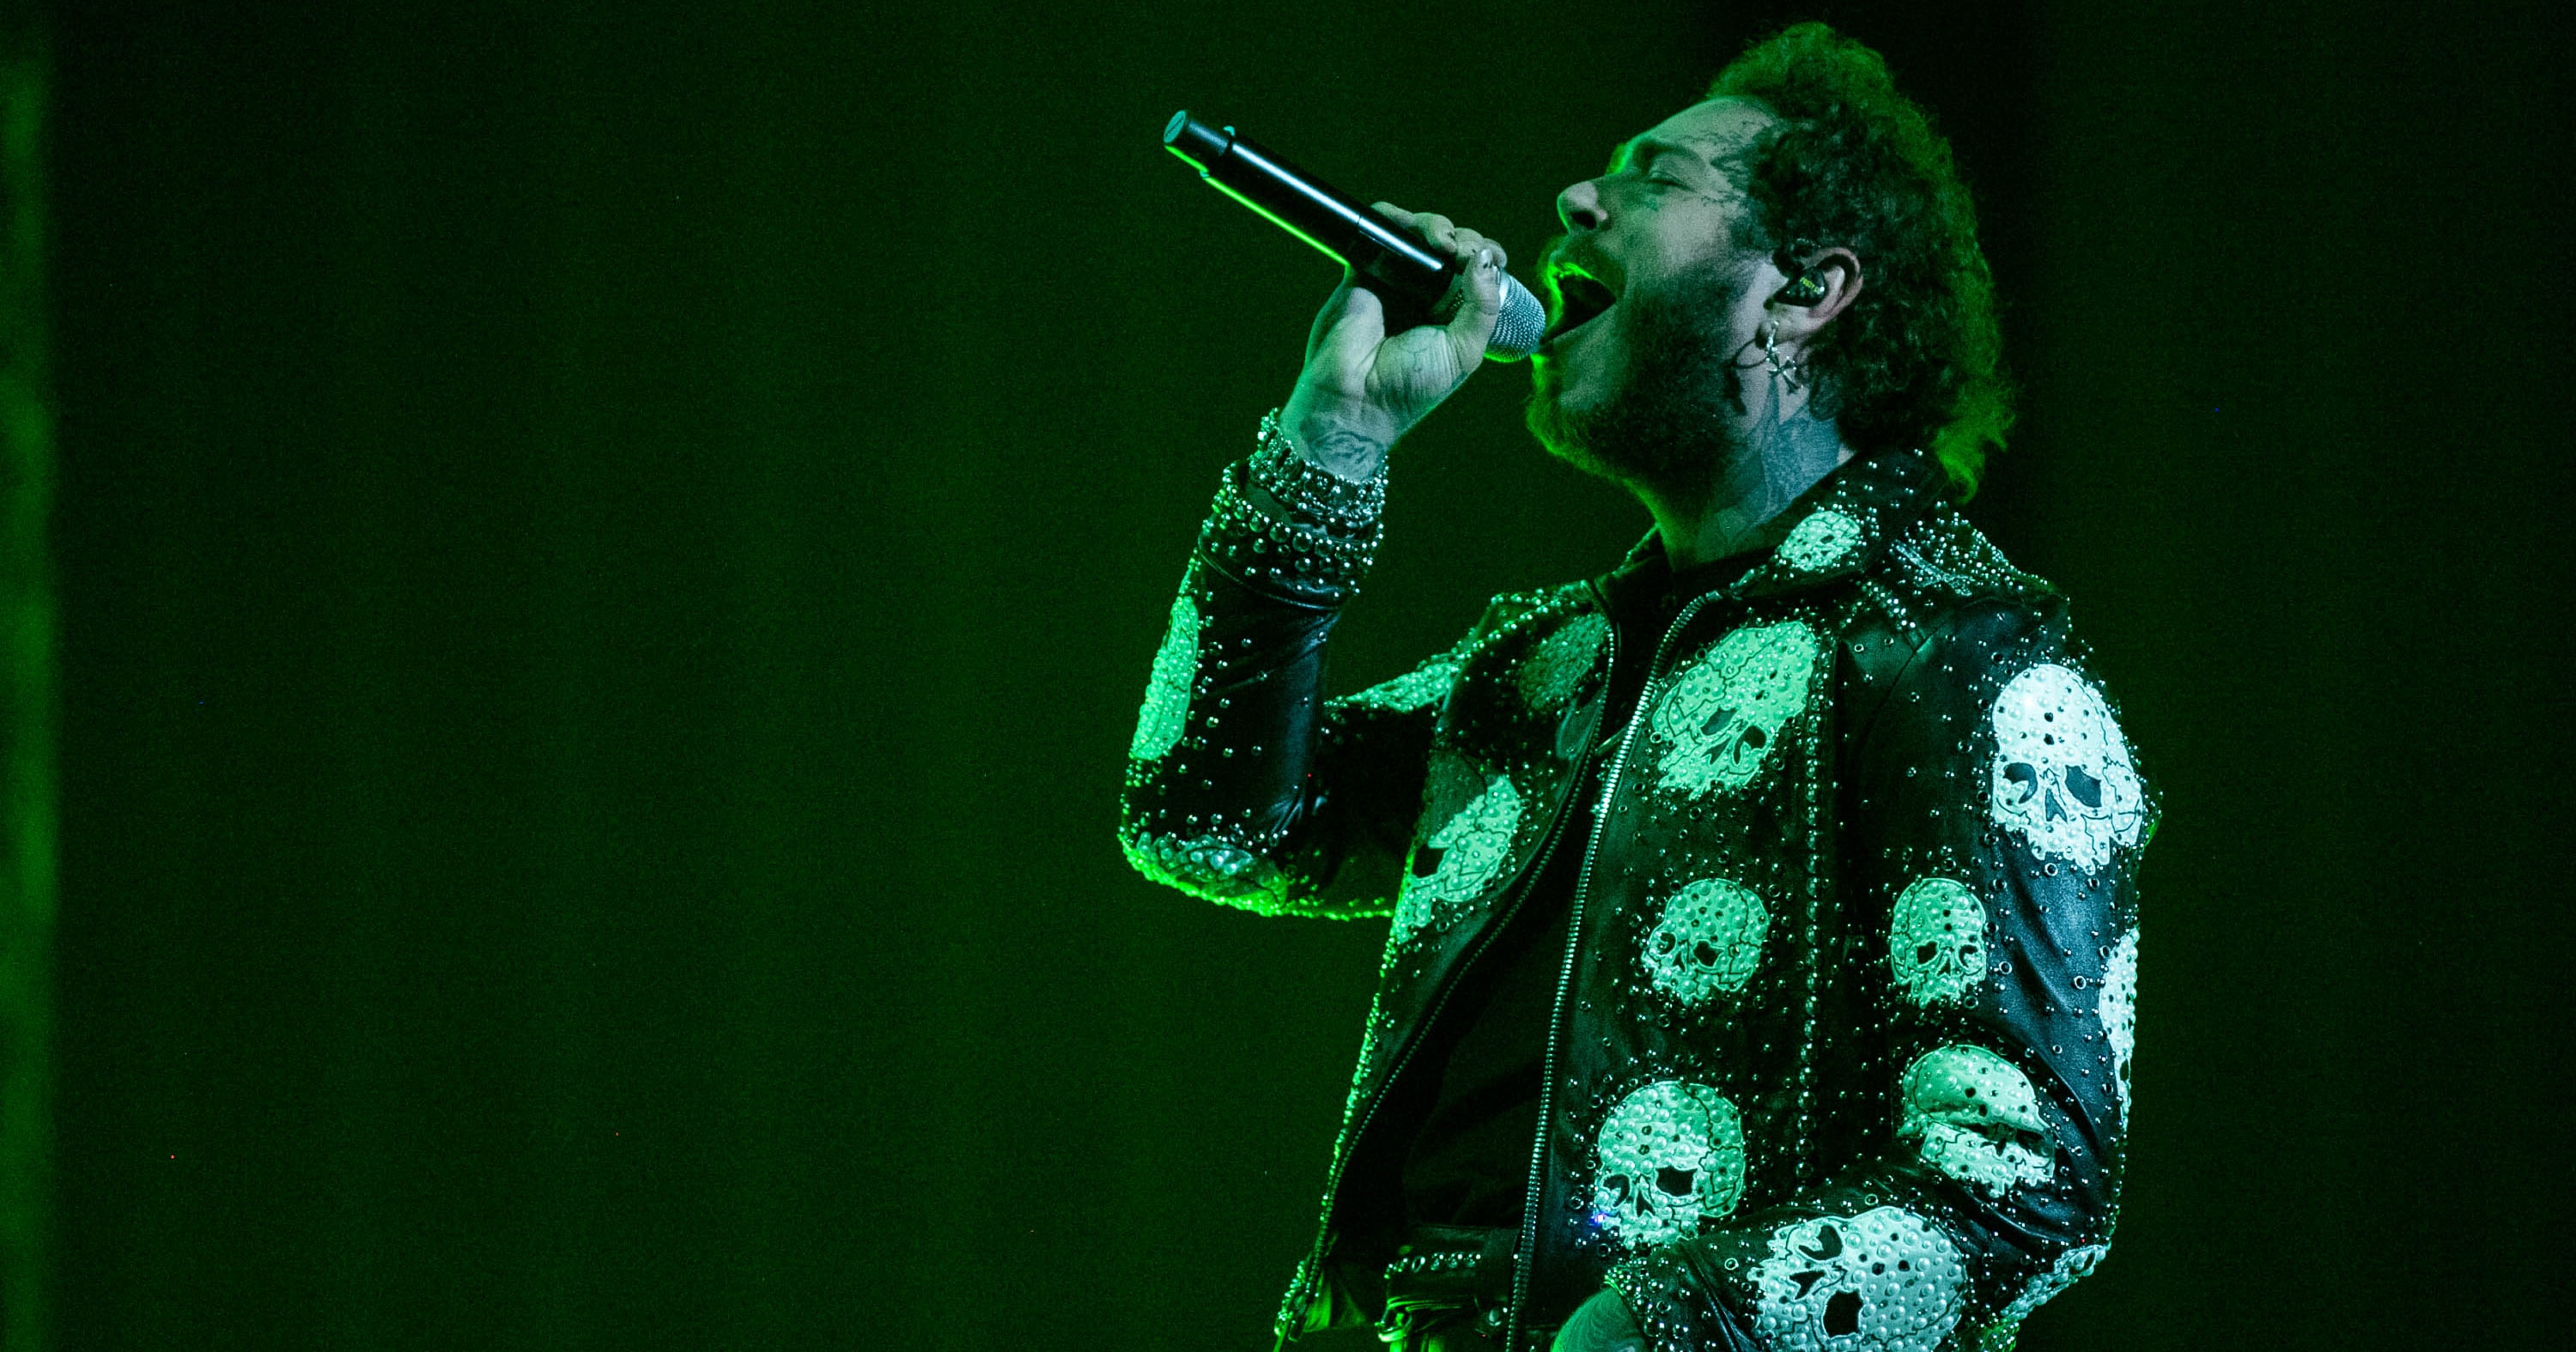 Post Malone feat. 21 Savage's 'Rockstar': Songs That Defined the Decade